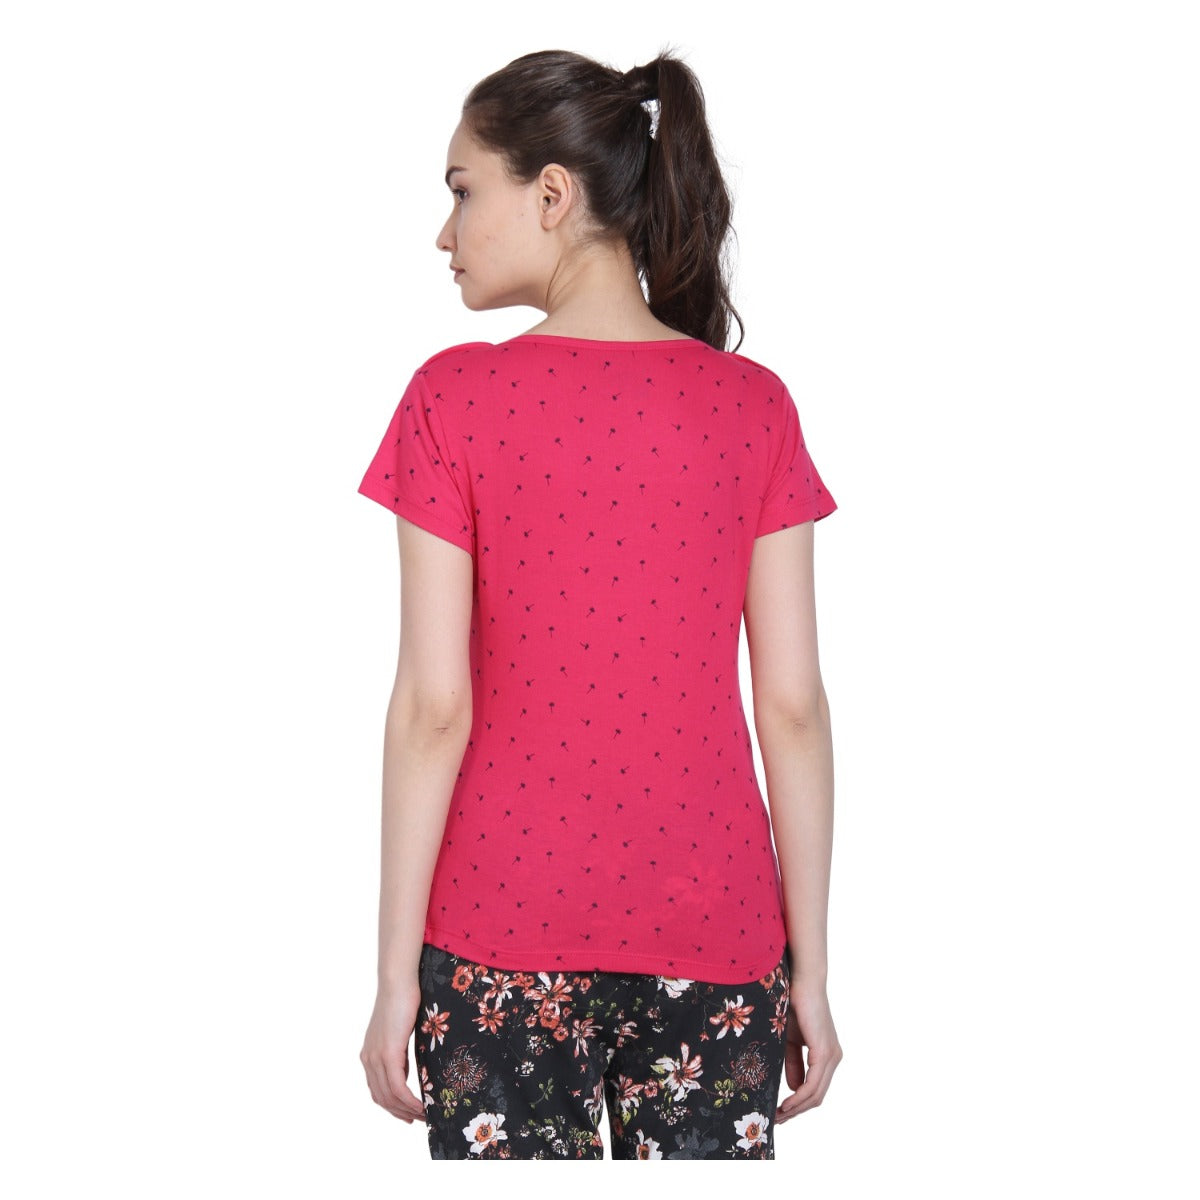 NEVA Round Neck Half Sleeve Front Printed T-shirt For Women-Hot Pink